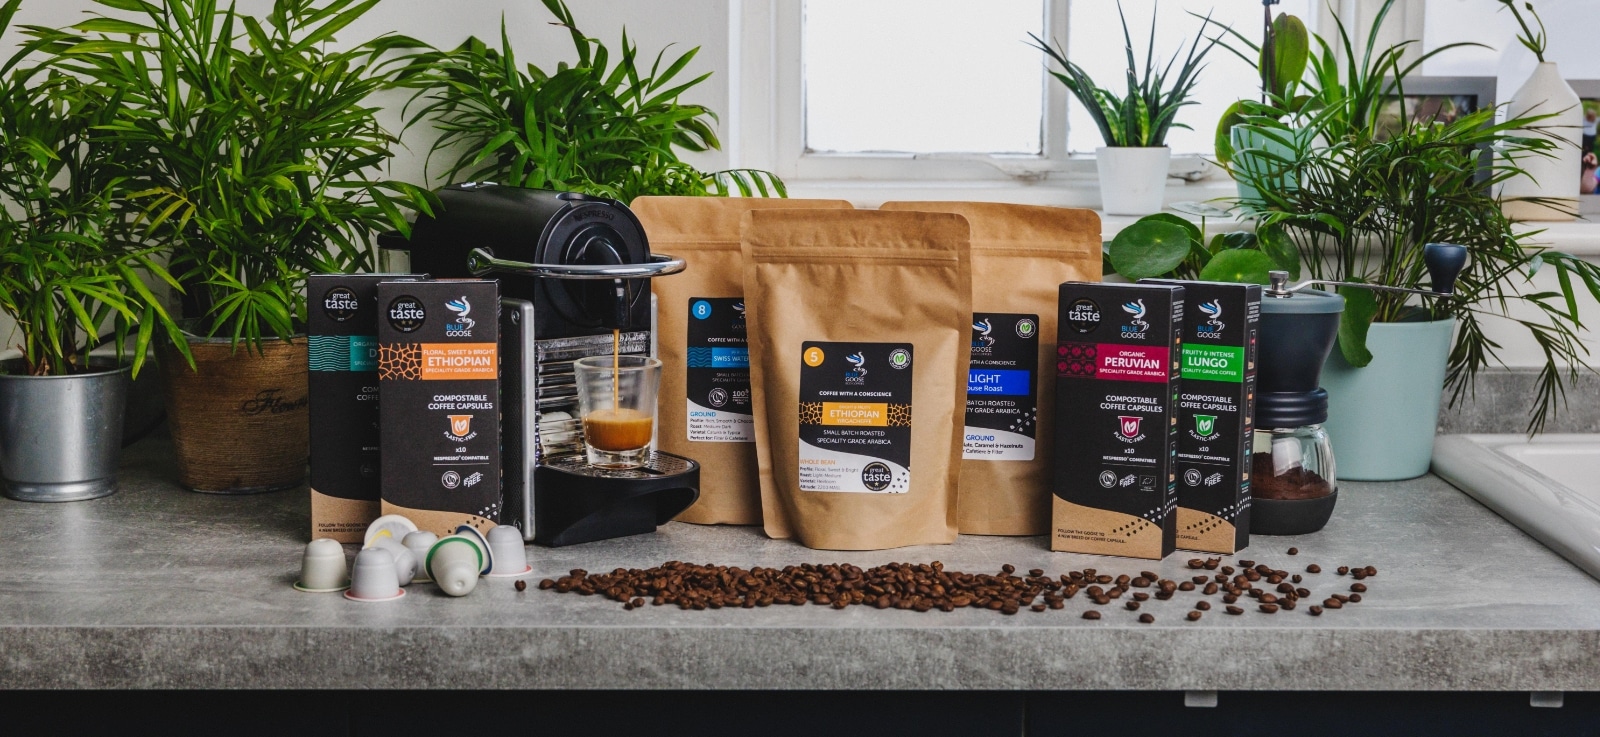 Plastic Free nespresso coffee pods bean ground coffee in compostable coffee pouch bags Blue Goose Eco Coffee